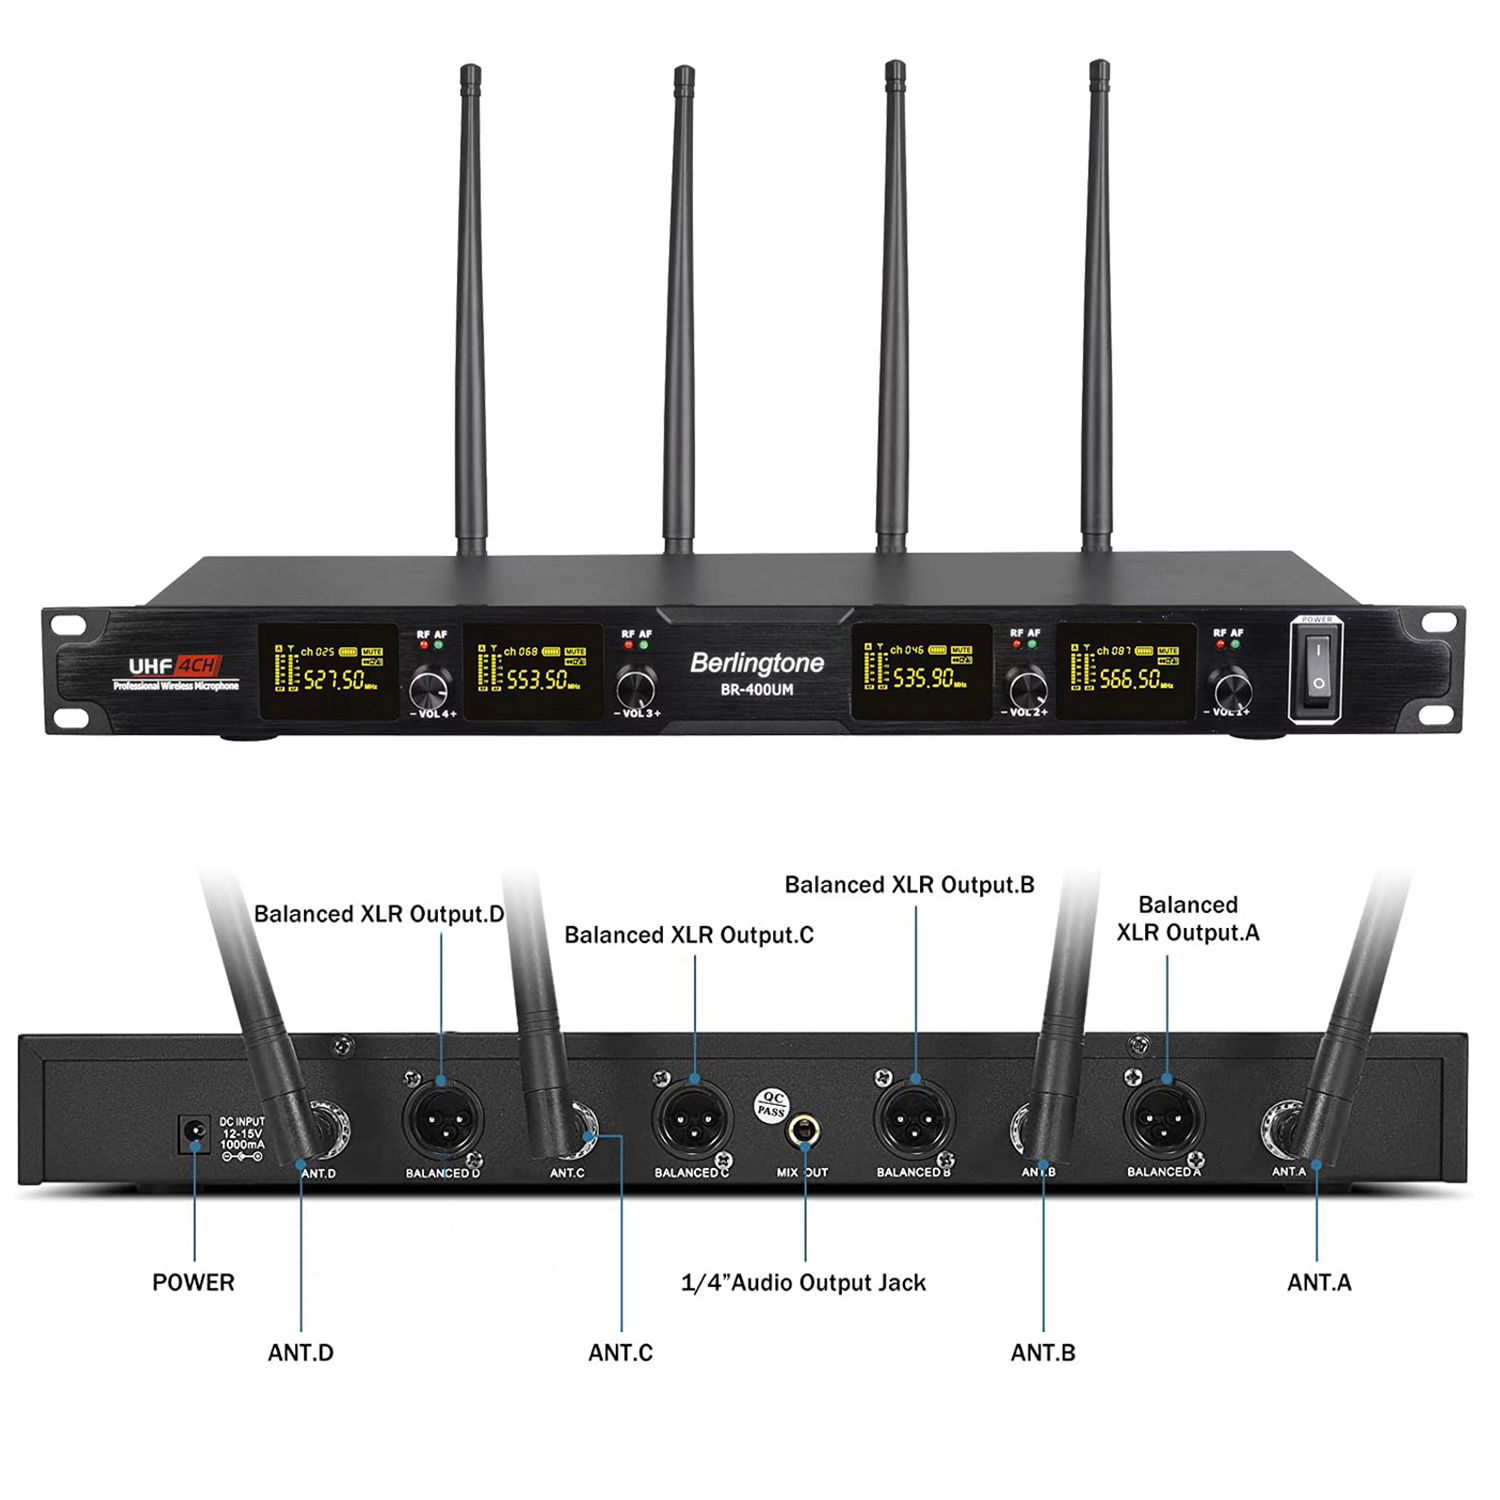 Berligtone BR-400UM Professional Wireless Microphone System, 4-Channel UHF Wireless Mic, Fixed Frequency Metal Cordless Mic with 4 Handheld Dynamic Microphones